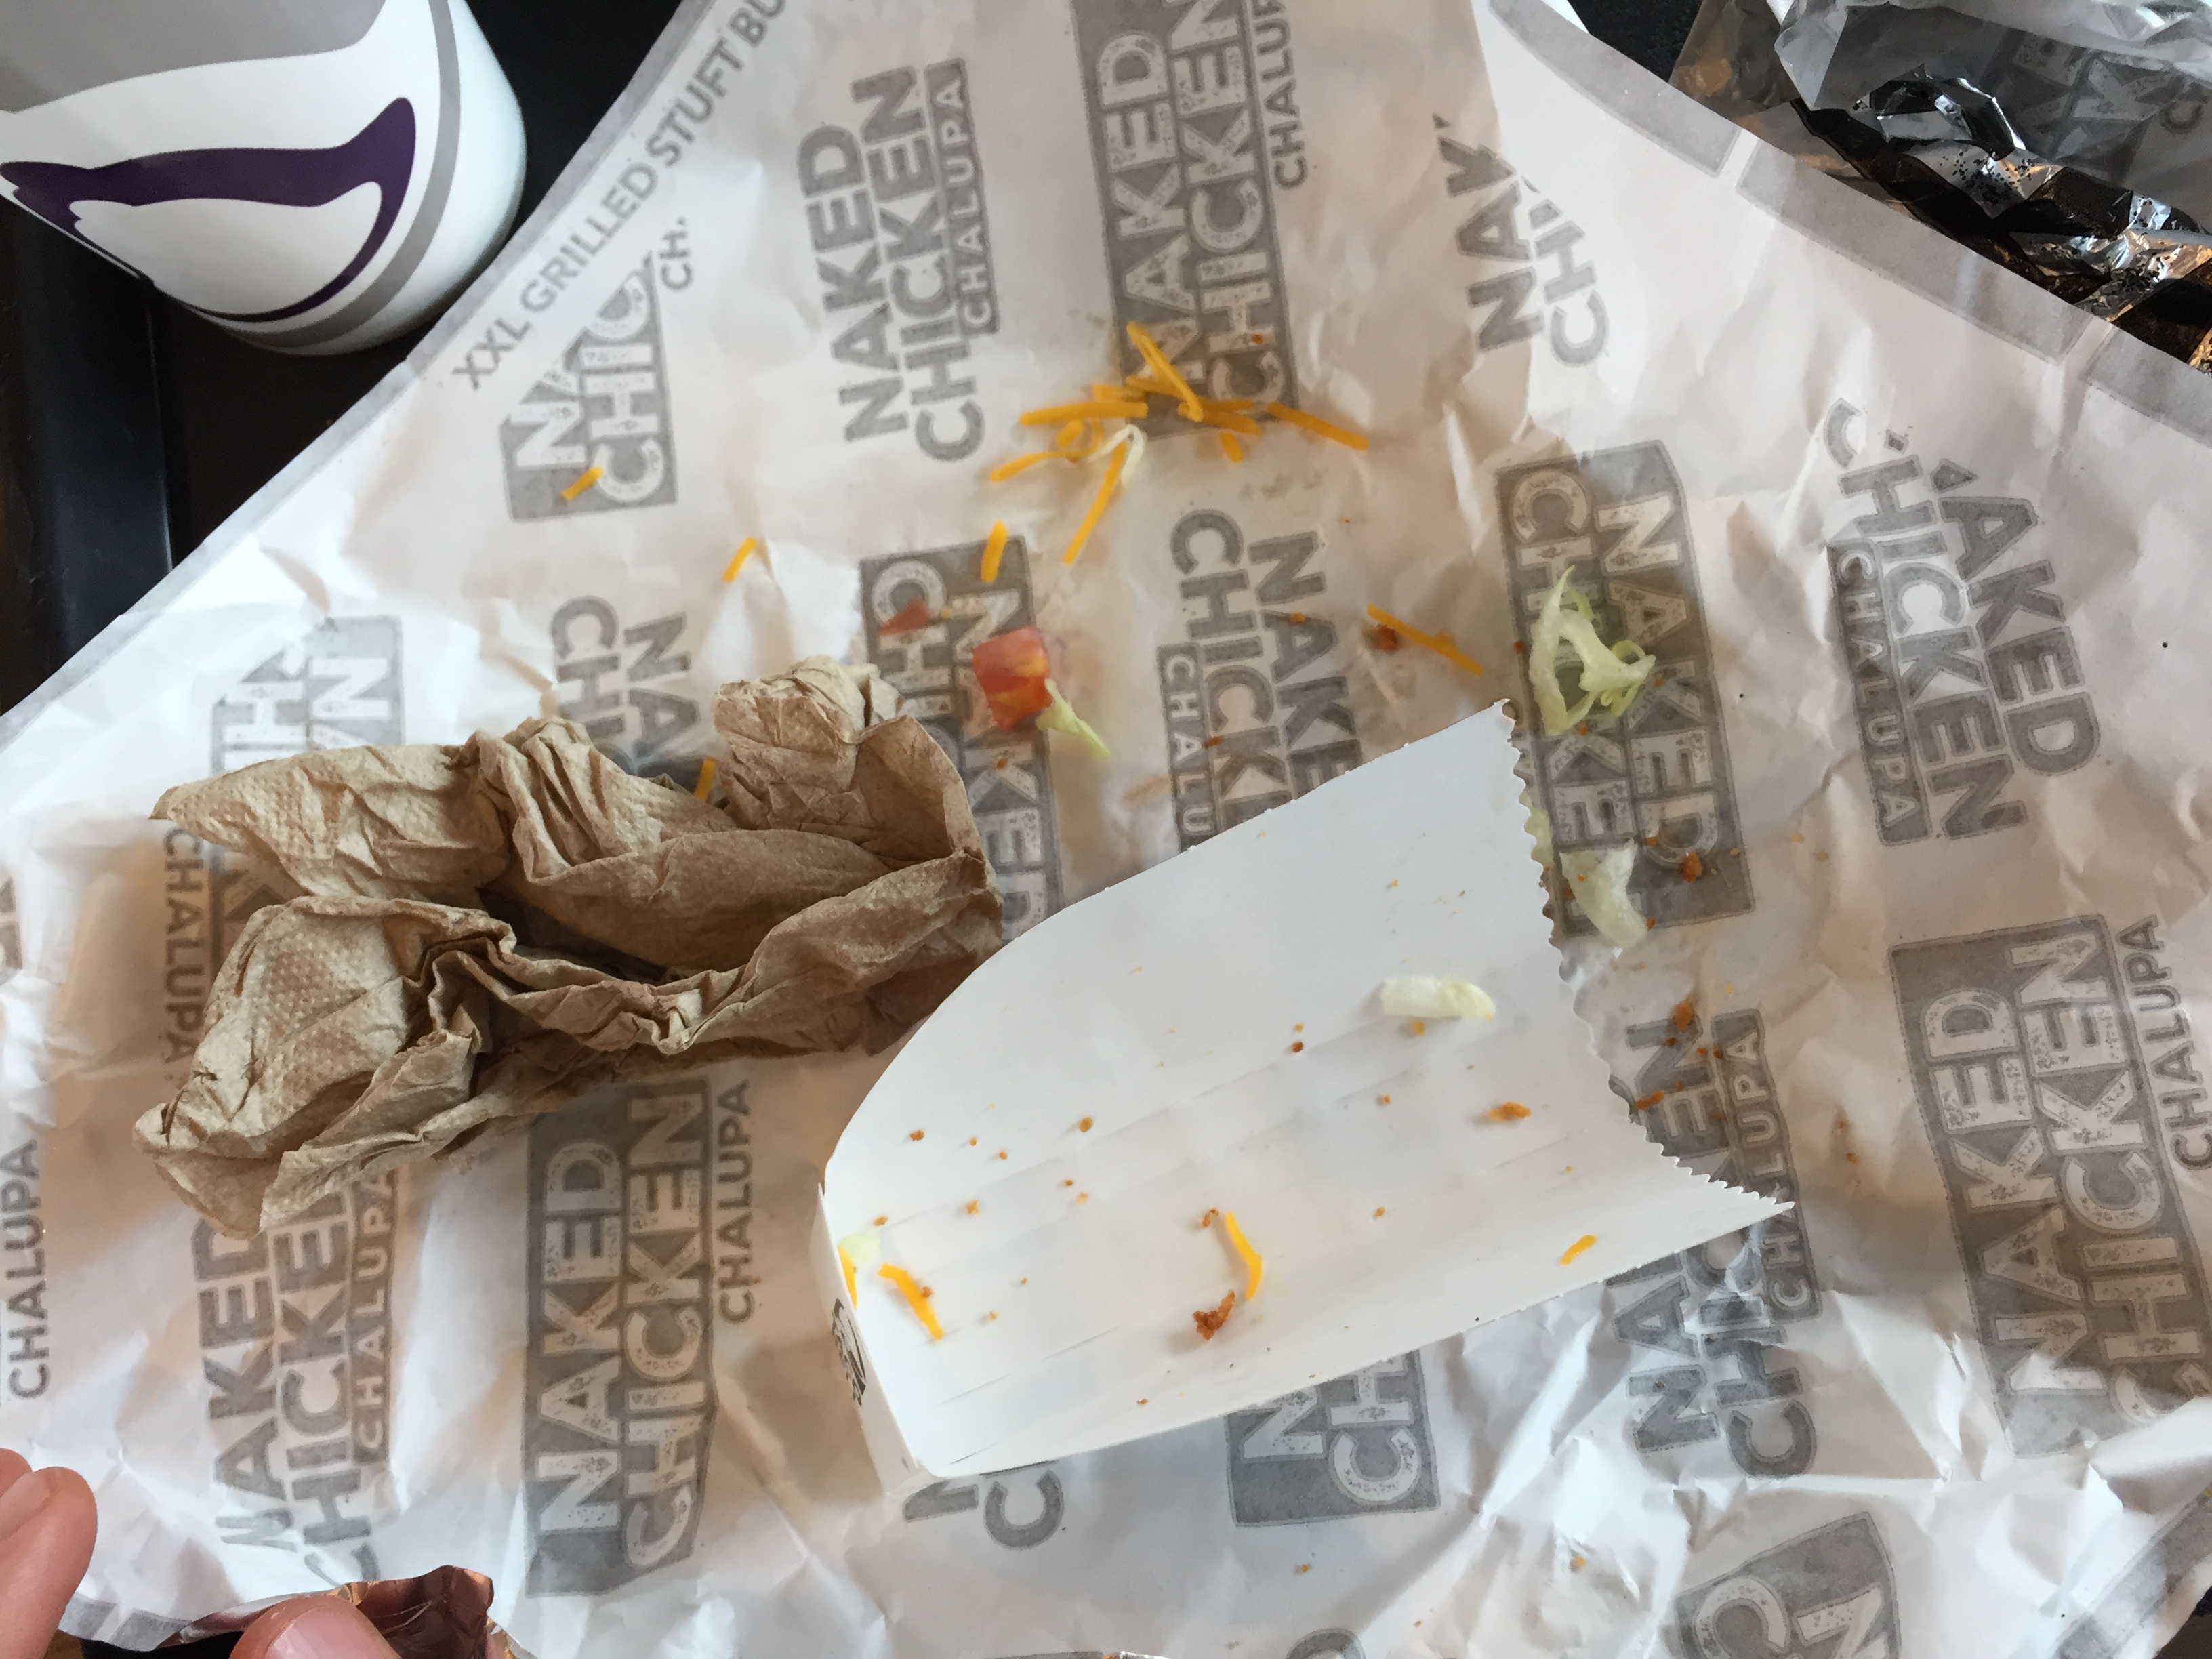 Taco bell made a great new item